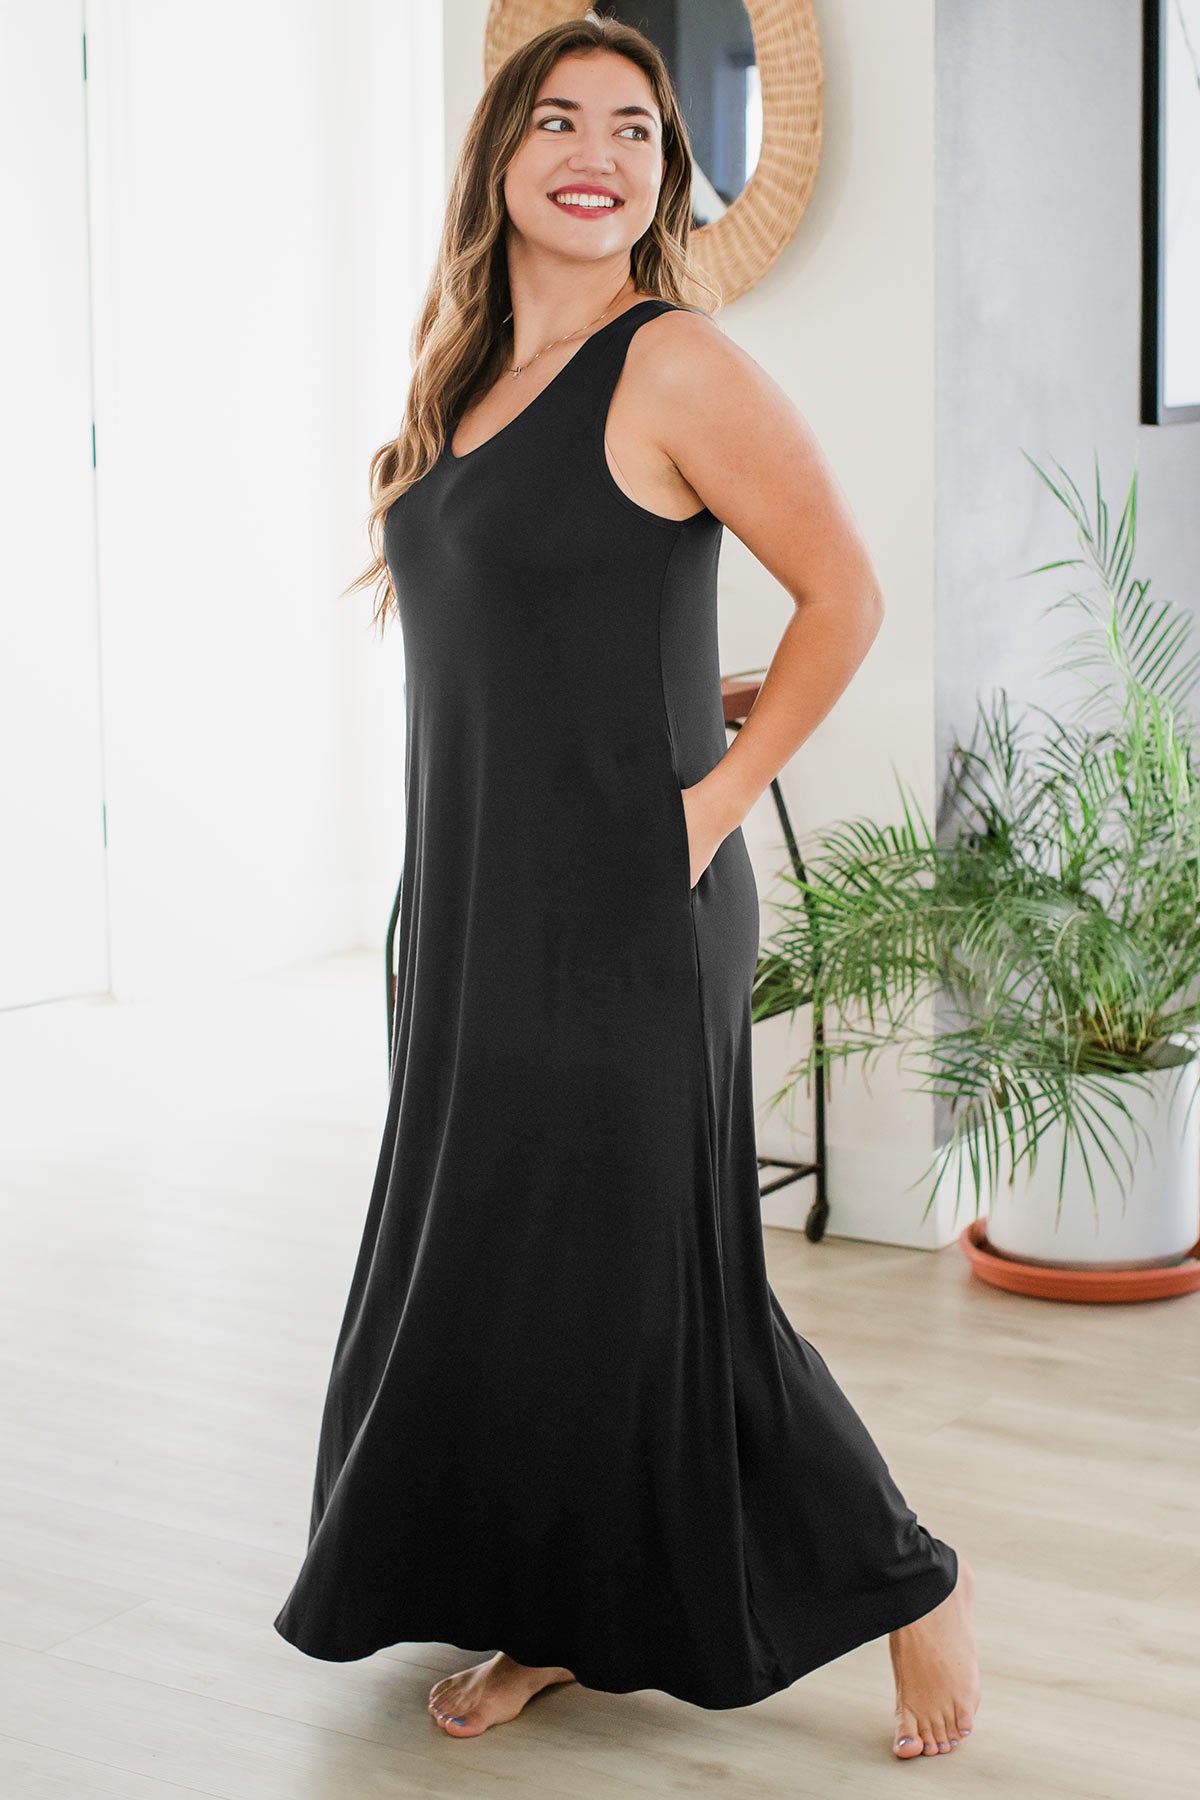 A woman standing facing to the side, one foot extended behind her and her head turned to look behind, wearing Yala Kinsley Sleeveless Bamboo Maxi Dress in Black